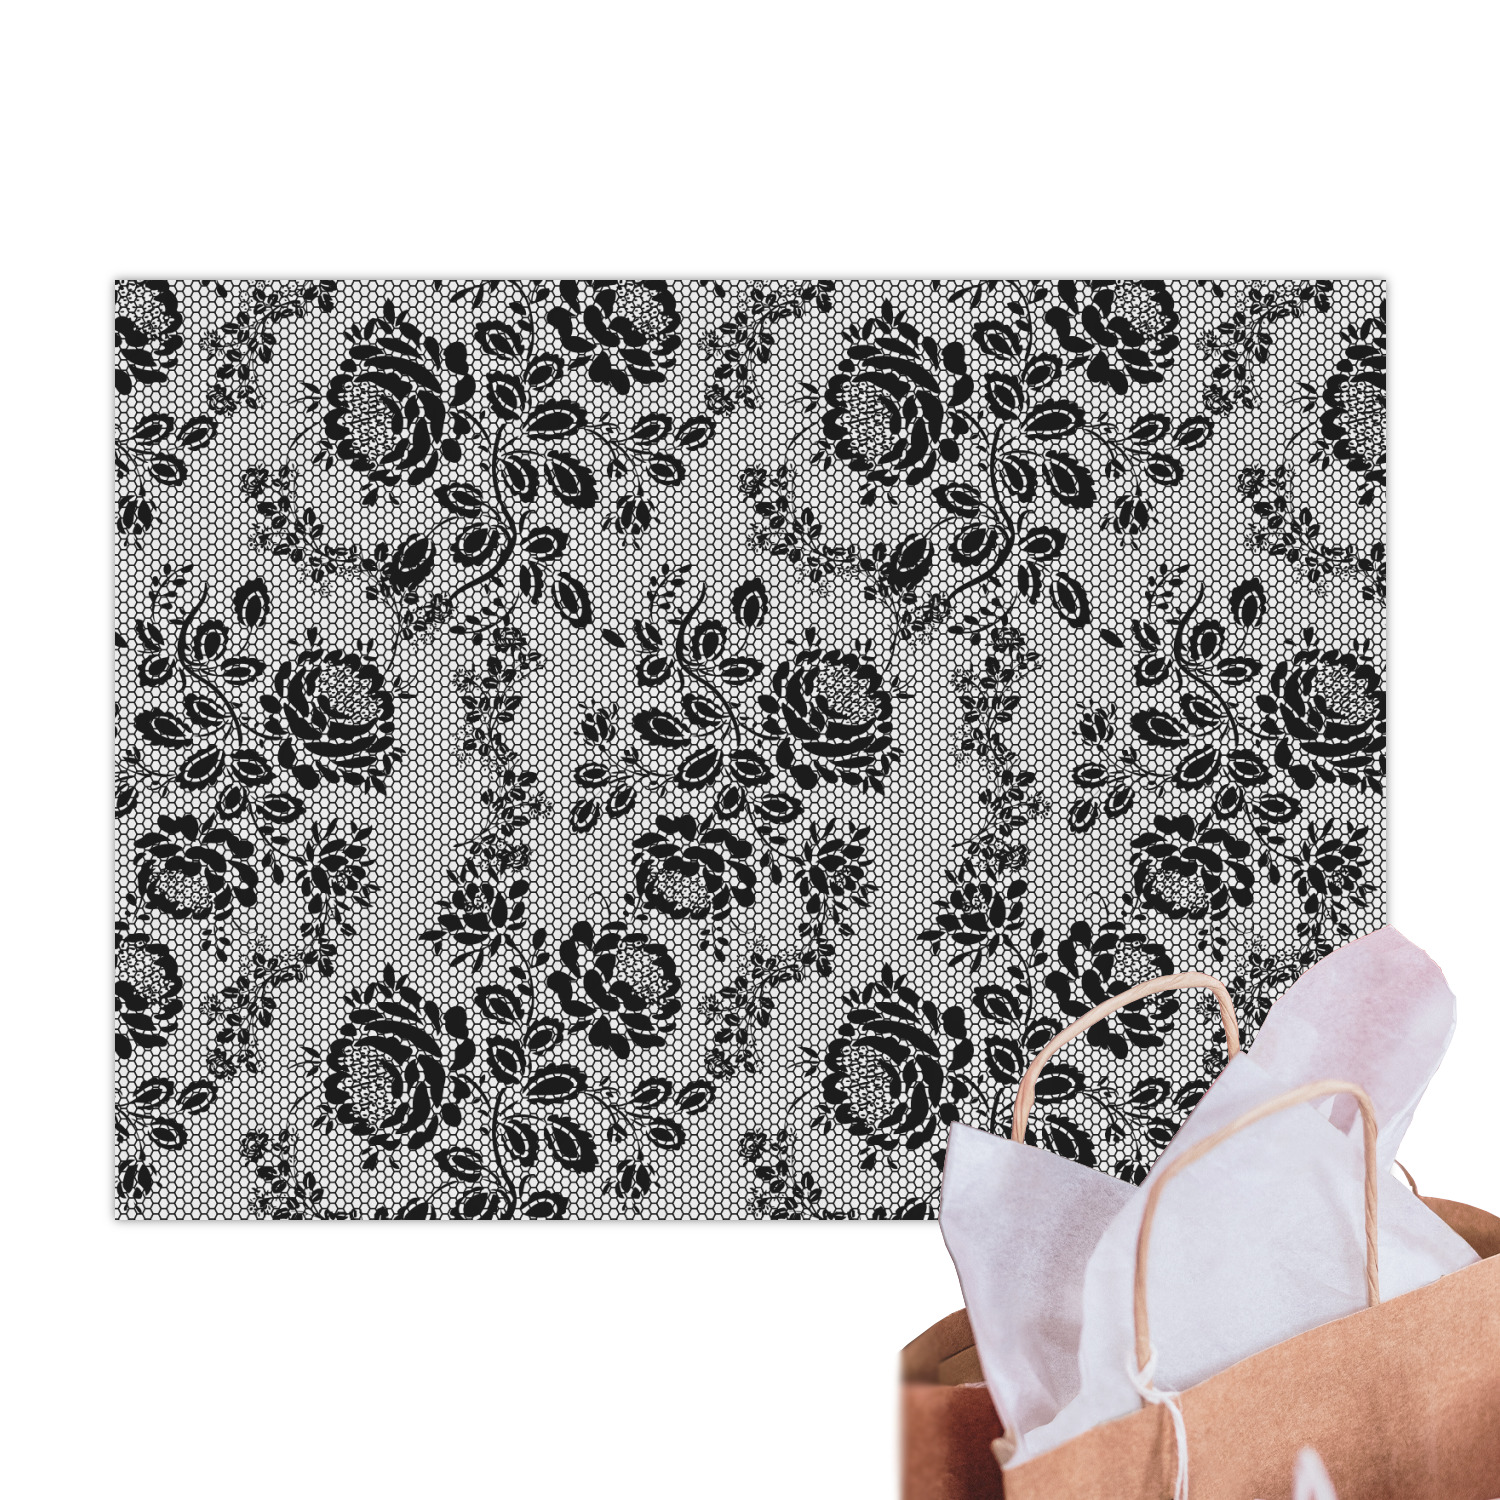 Luxury Black Floral Patterned Tissue Paper